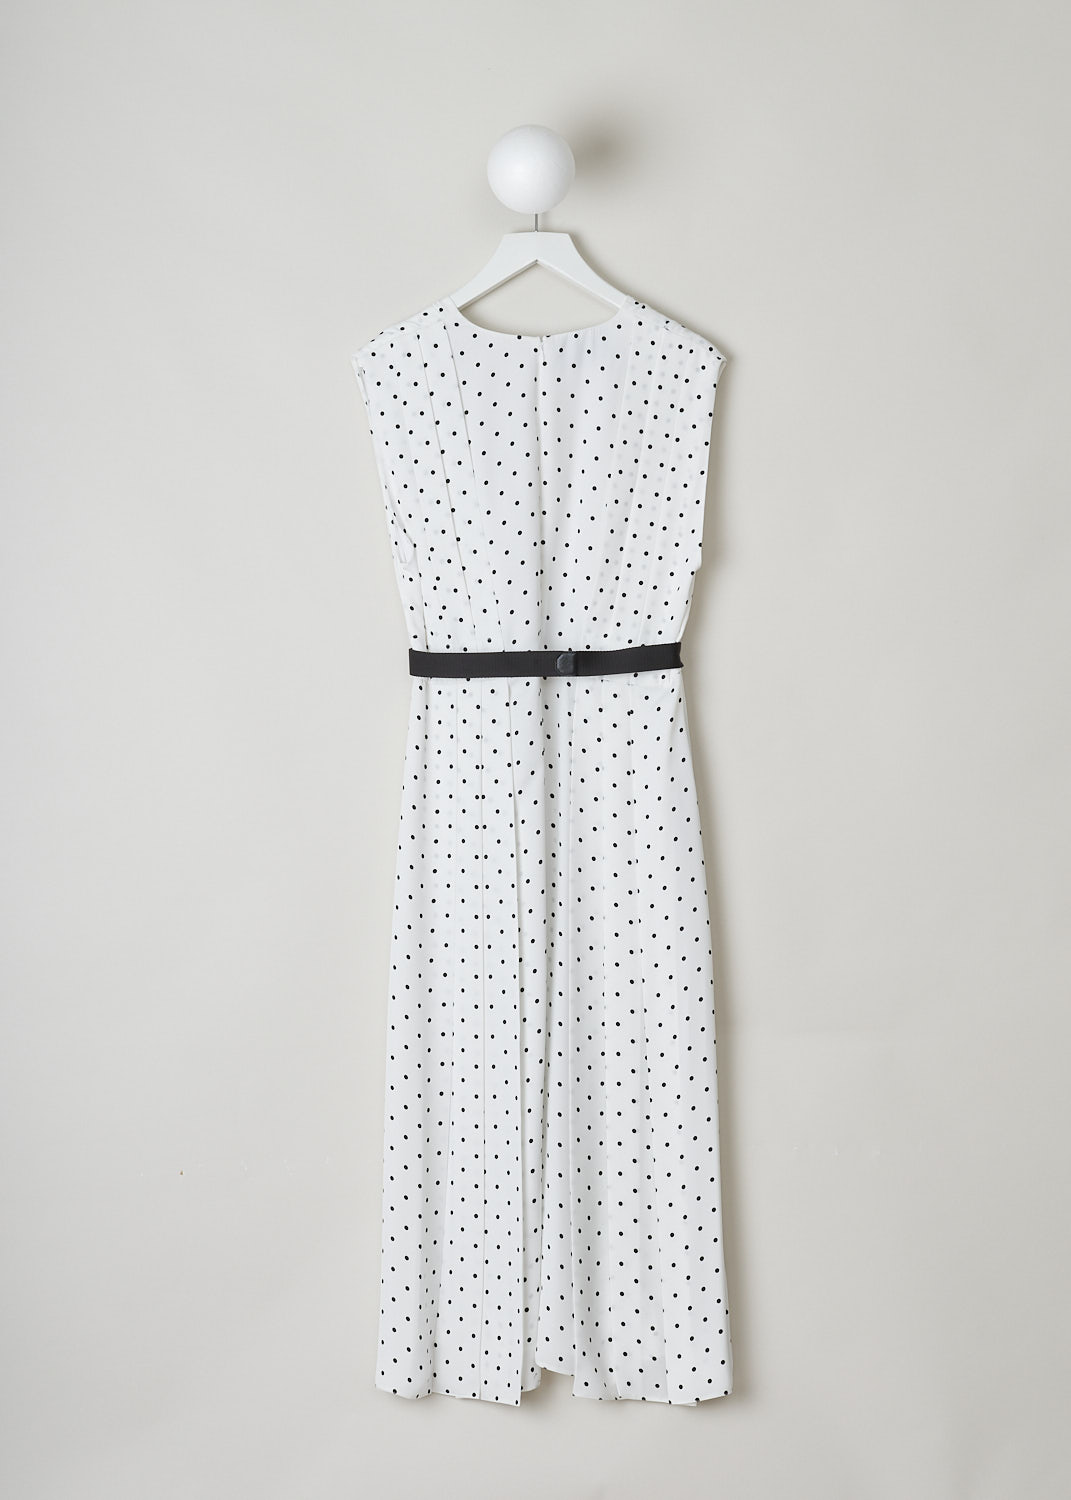 PRADA, WHITE POLKA-DOT MIDI DRESS WITH BELT, TWILL_FLUIDO_PO_P3D12H_F0A72_AVORIO_NERO, Black, White, Print, Back, This sleeveless silk dress has a white base with a black polka-dot print. The bodice has a V-neckline and pleats that go down into the skirt. A black canvas belt with a silver buckle can be used to cinch in the waist. A concealed centre zip in the back functions as the closure option. The dress comes with a detachable slip dress. 
